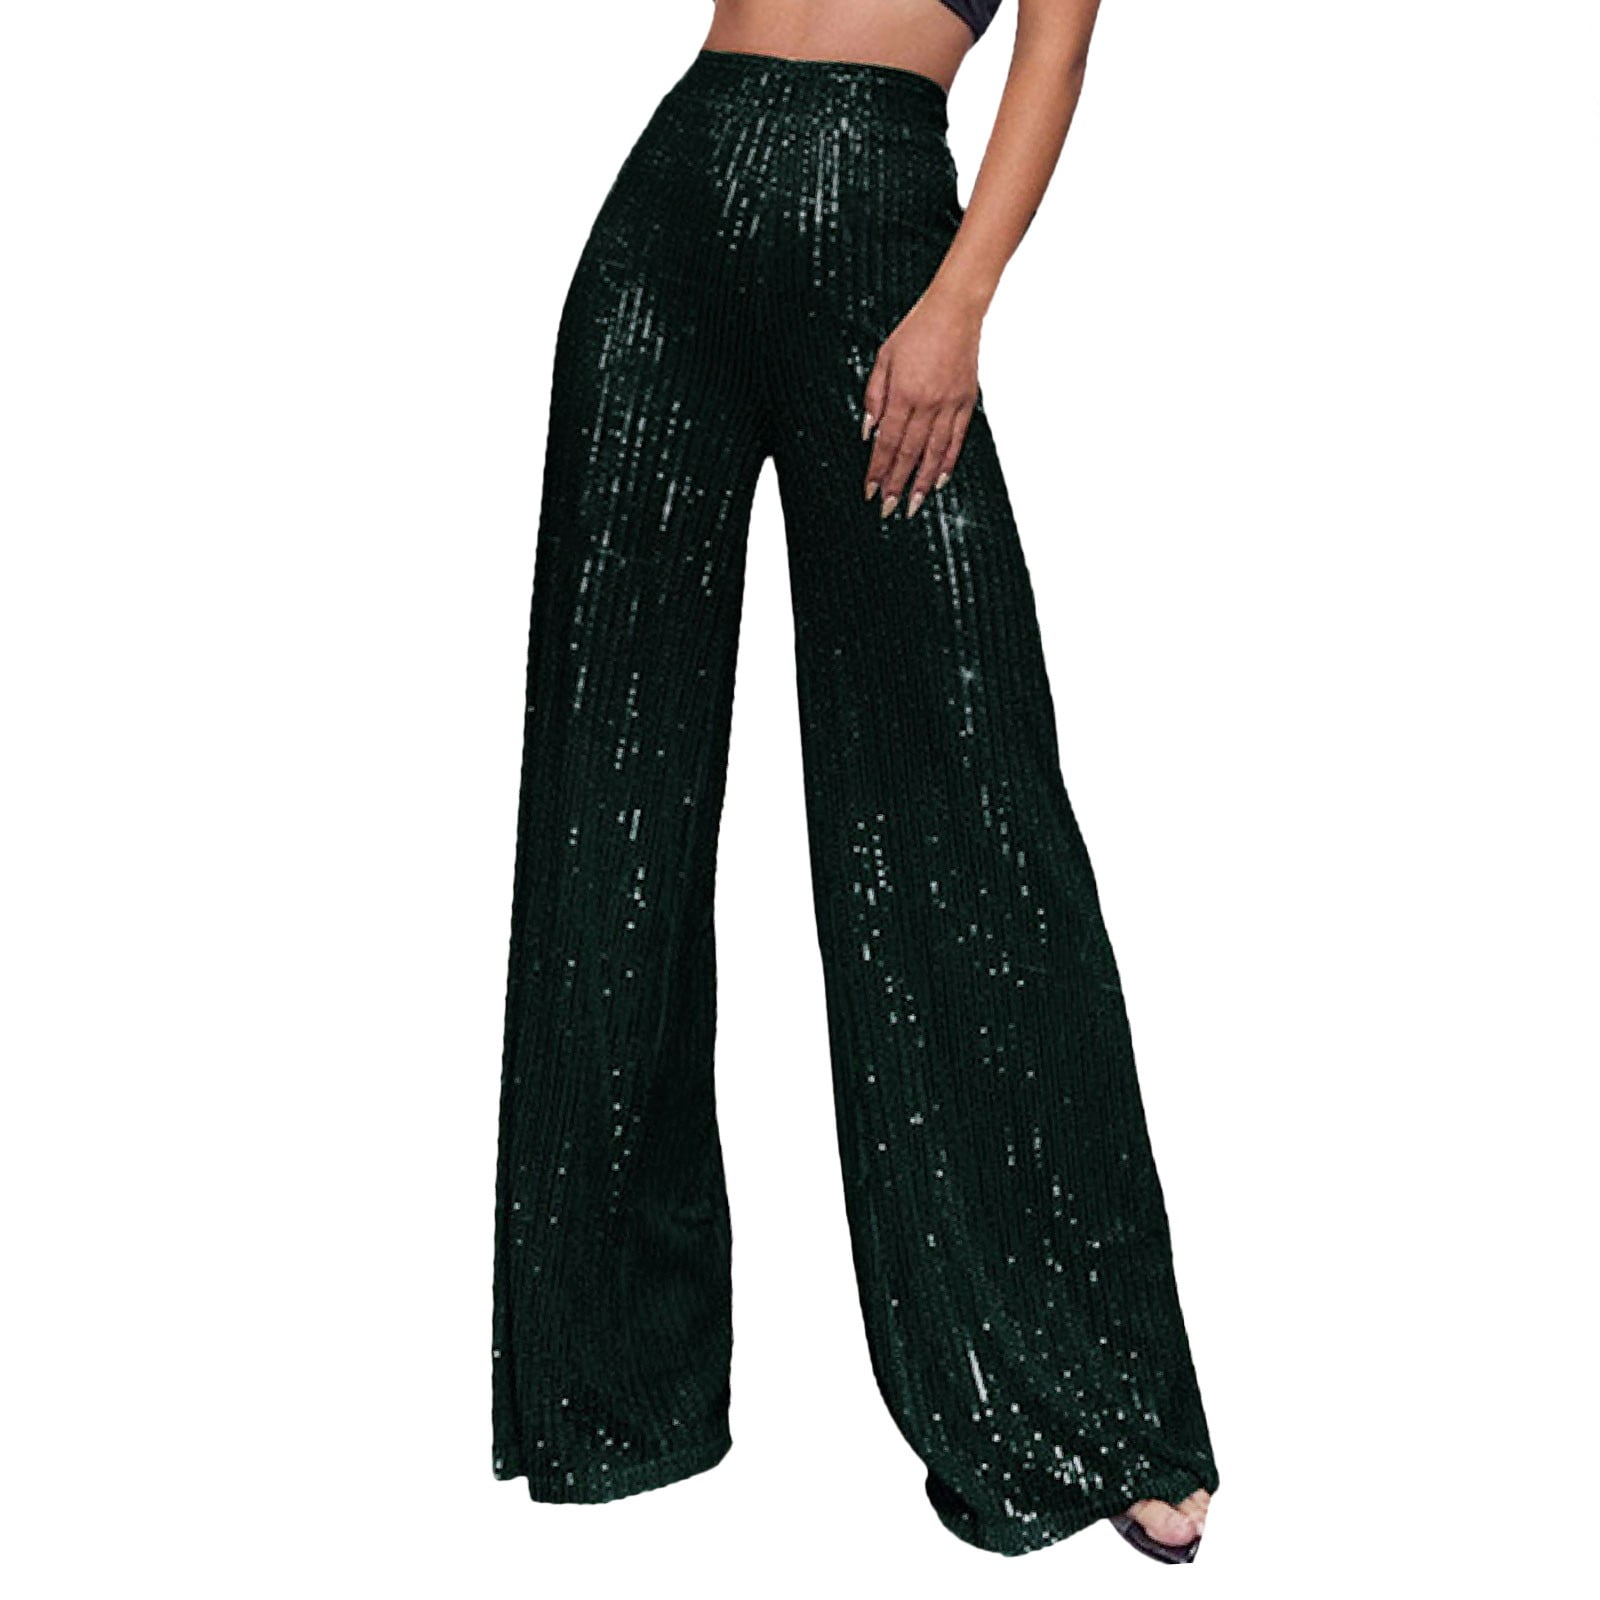 GAQLIVE Women Pants Fashion Casual Sequined Pants Sparkling Sequins ...